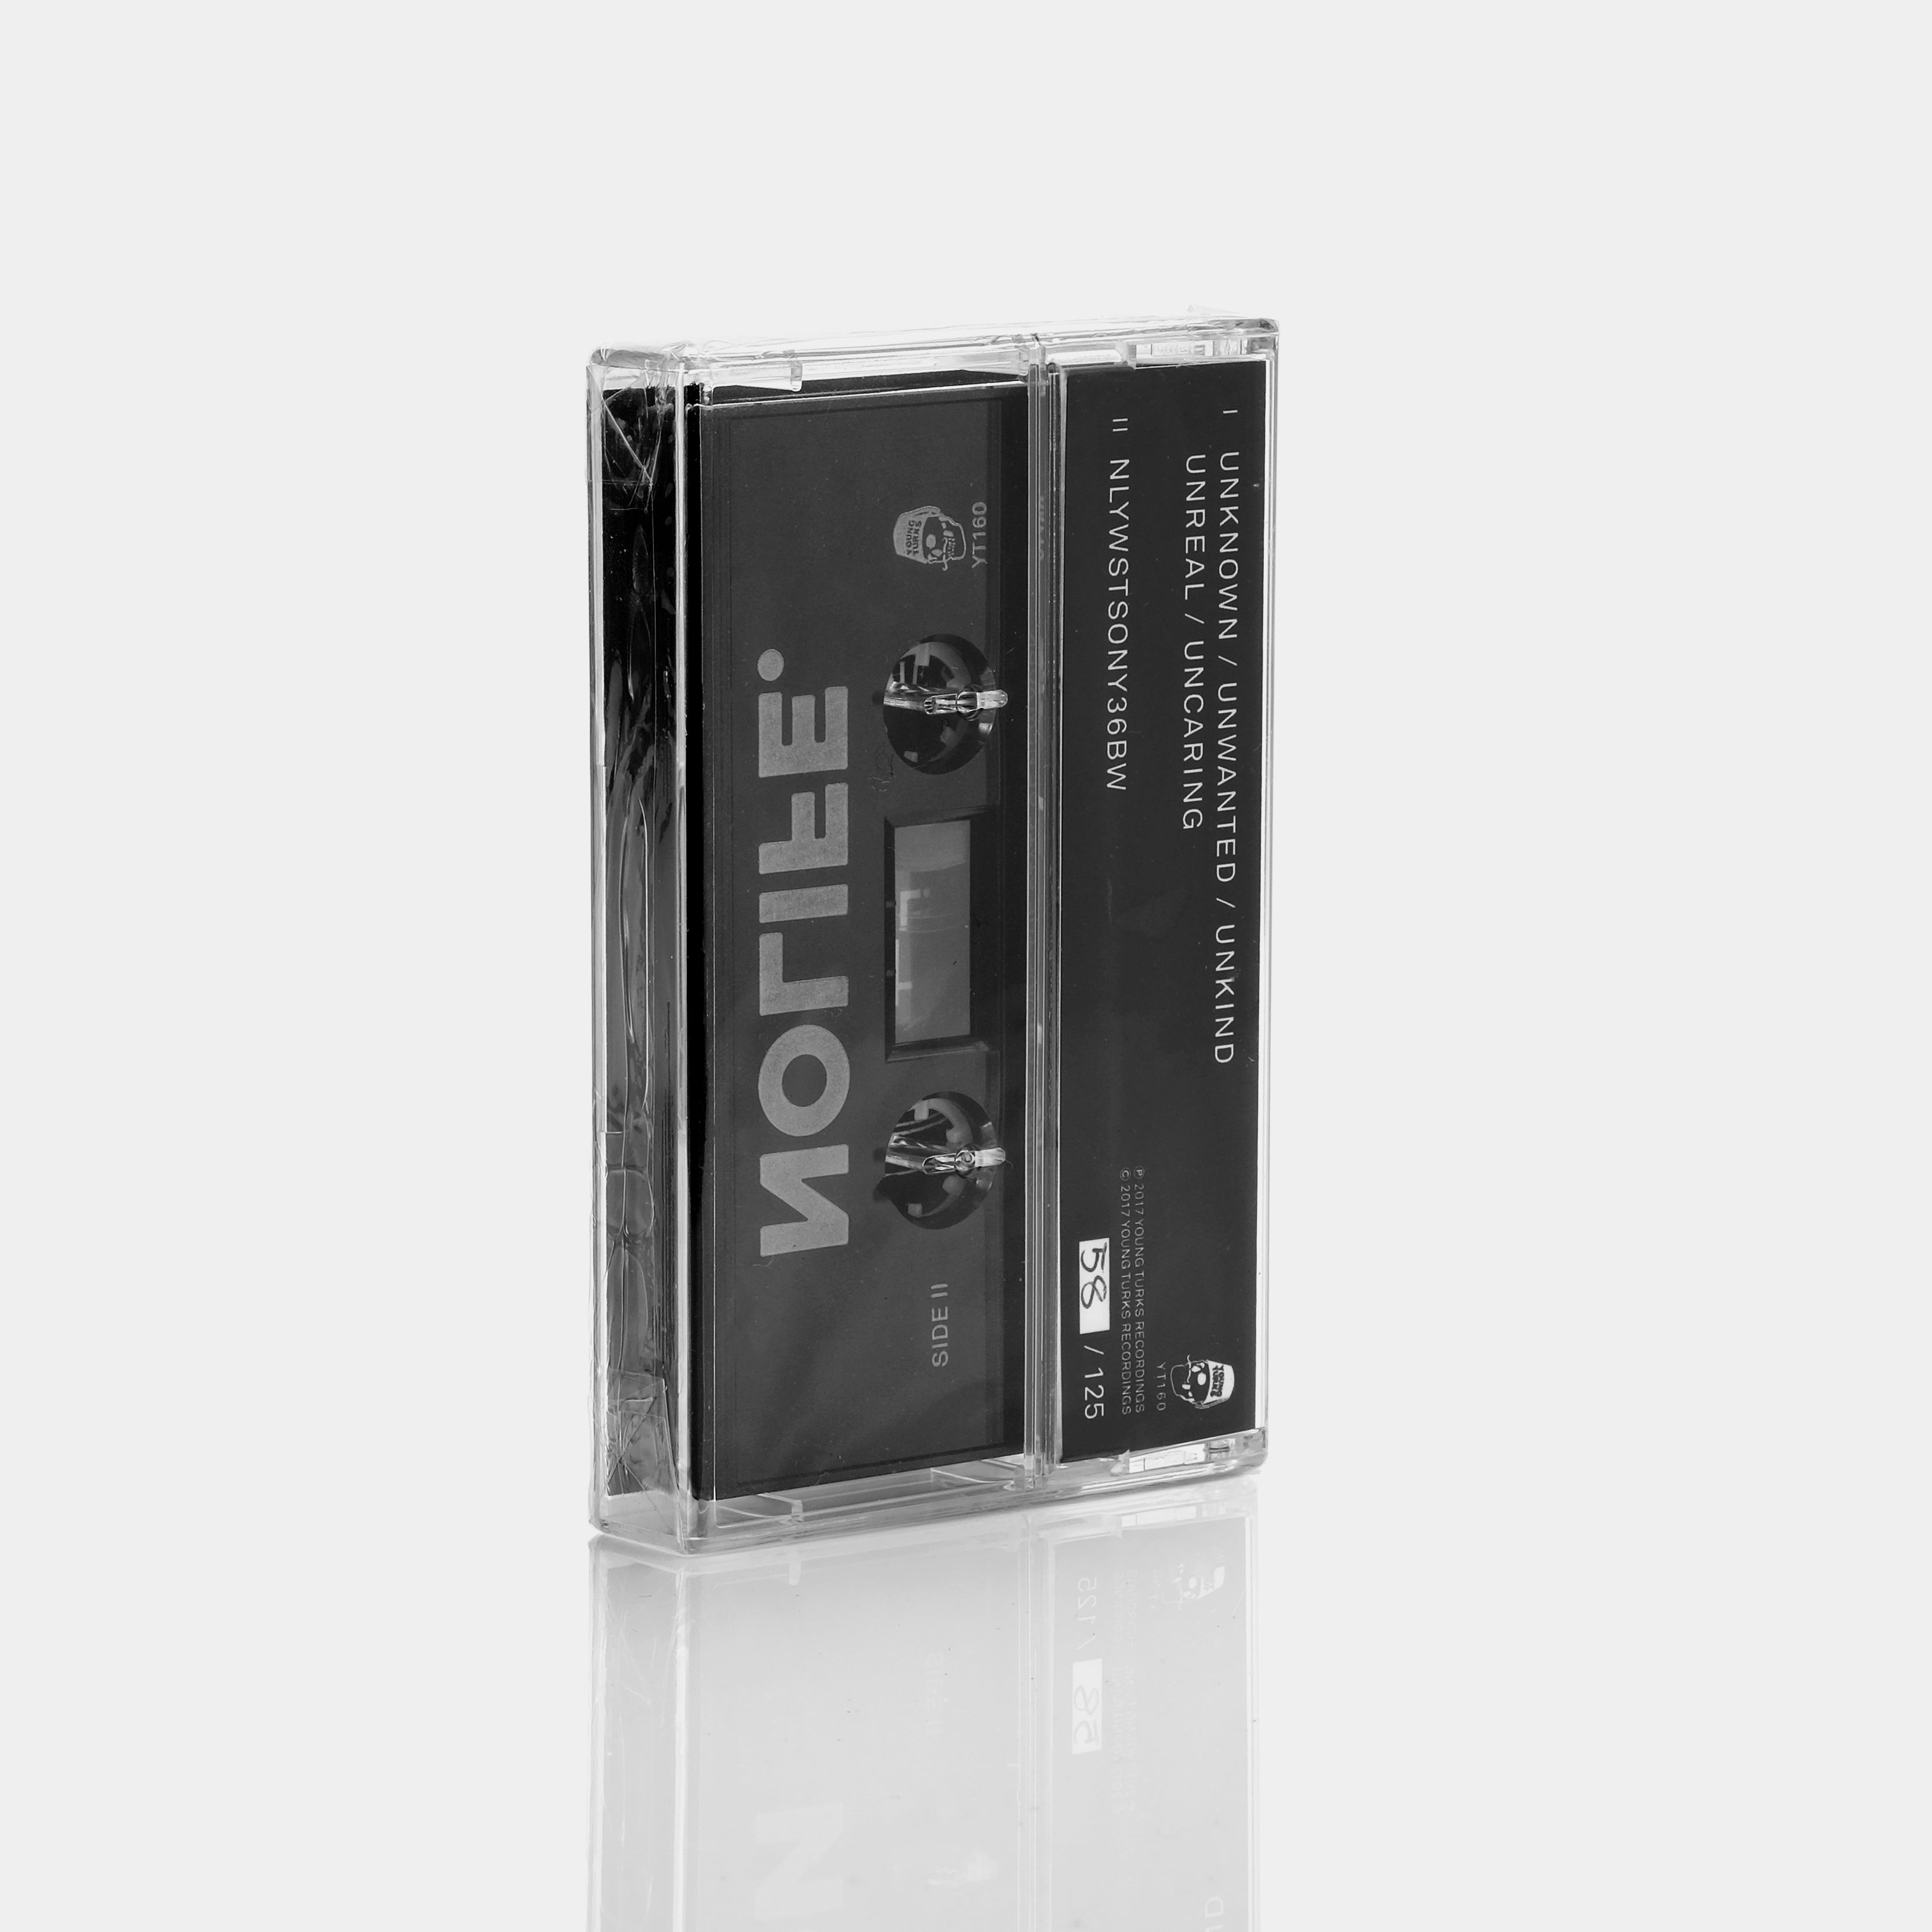 NOLIFE - YOU WON'T SURVIVE THE STATE OF NEW YORK Cassette Tape